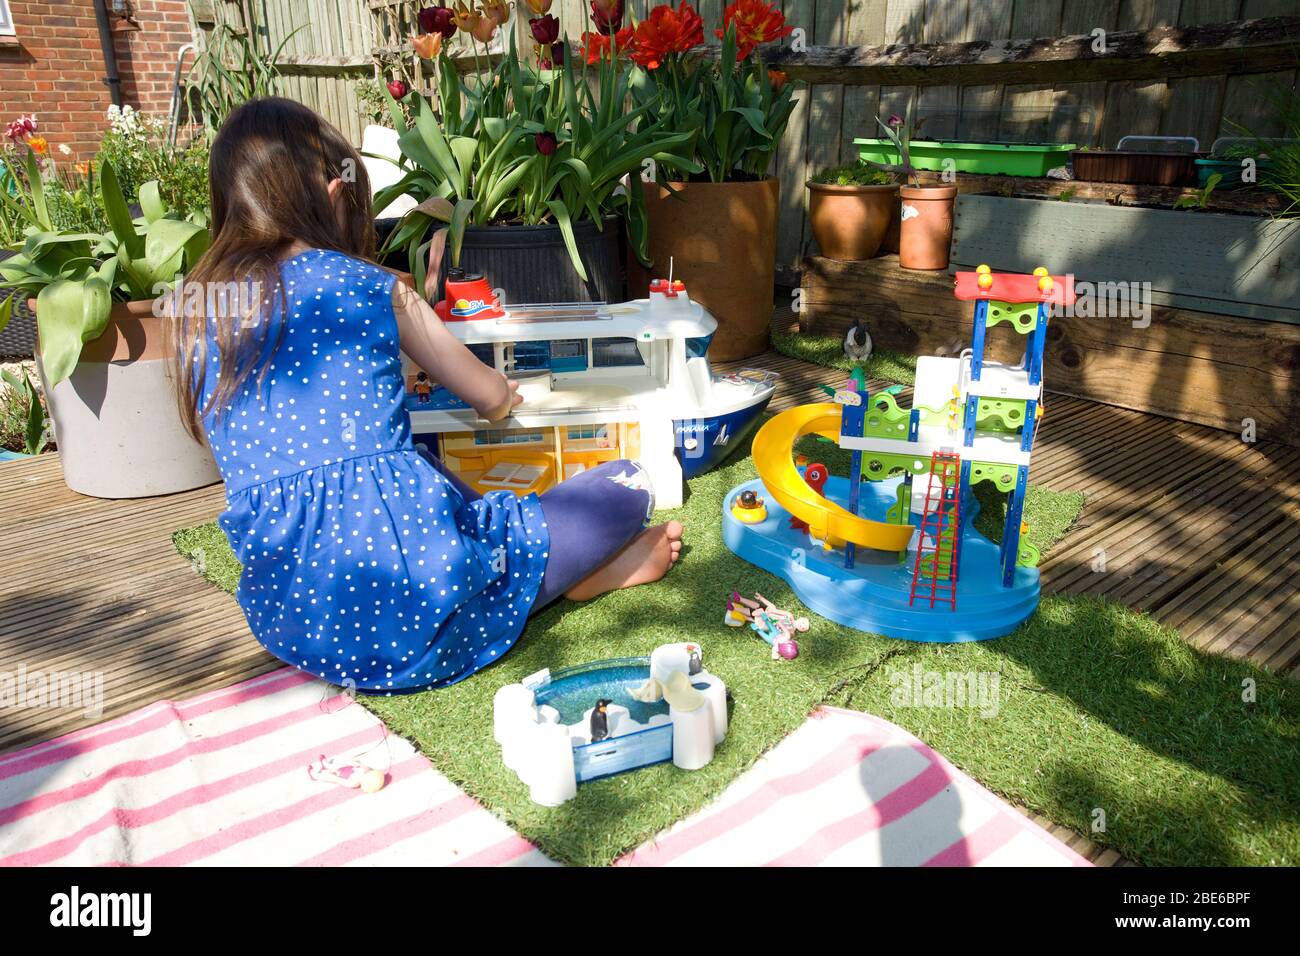 Young girl playing with playmobil outside in garden, England Stock Photo -  Alamy